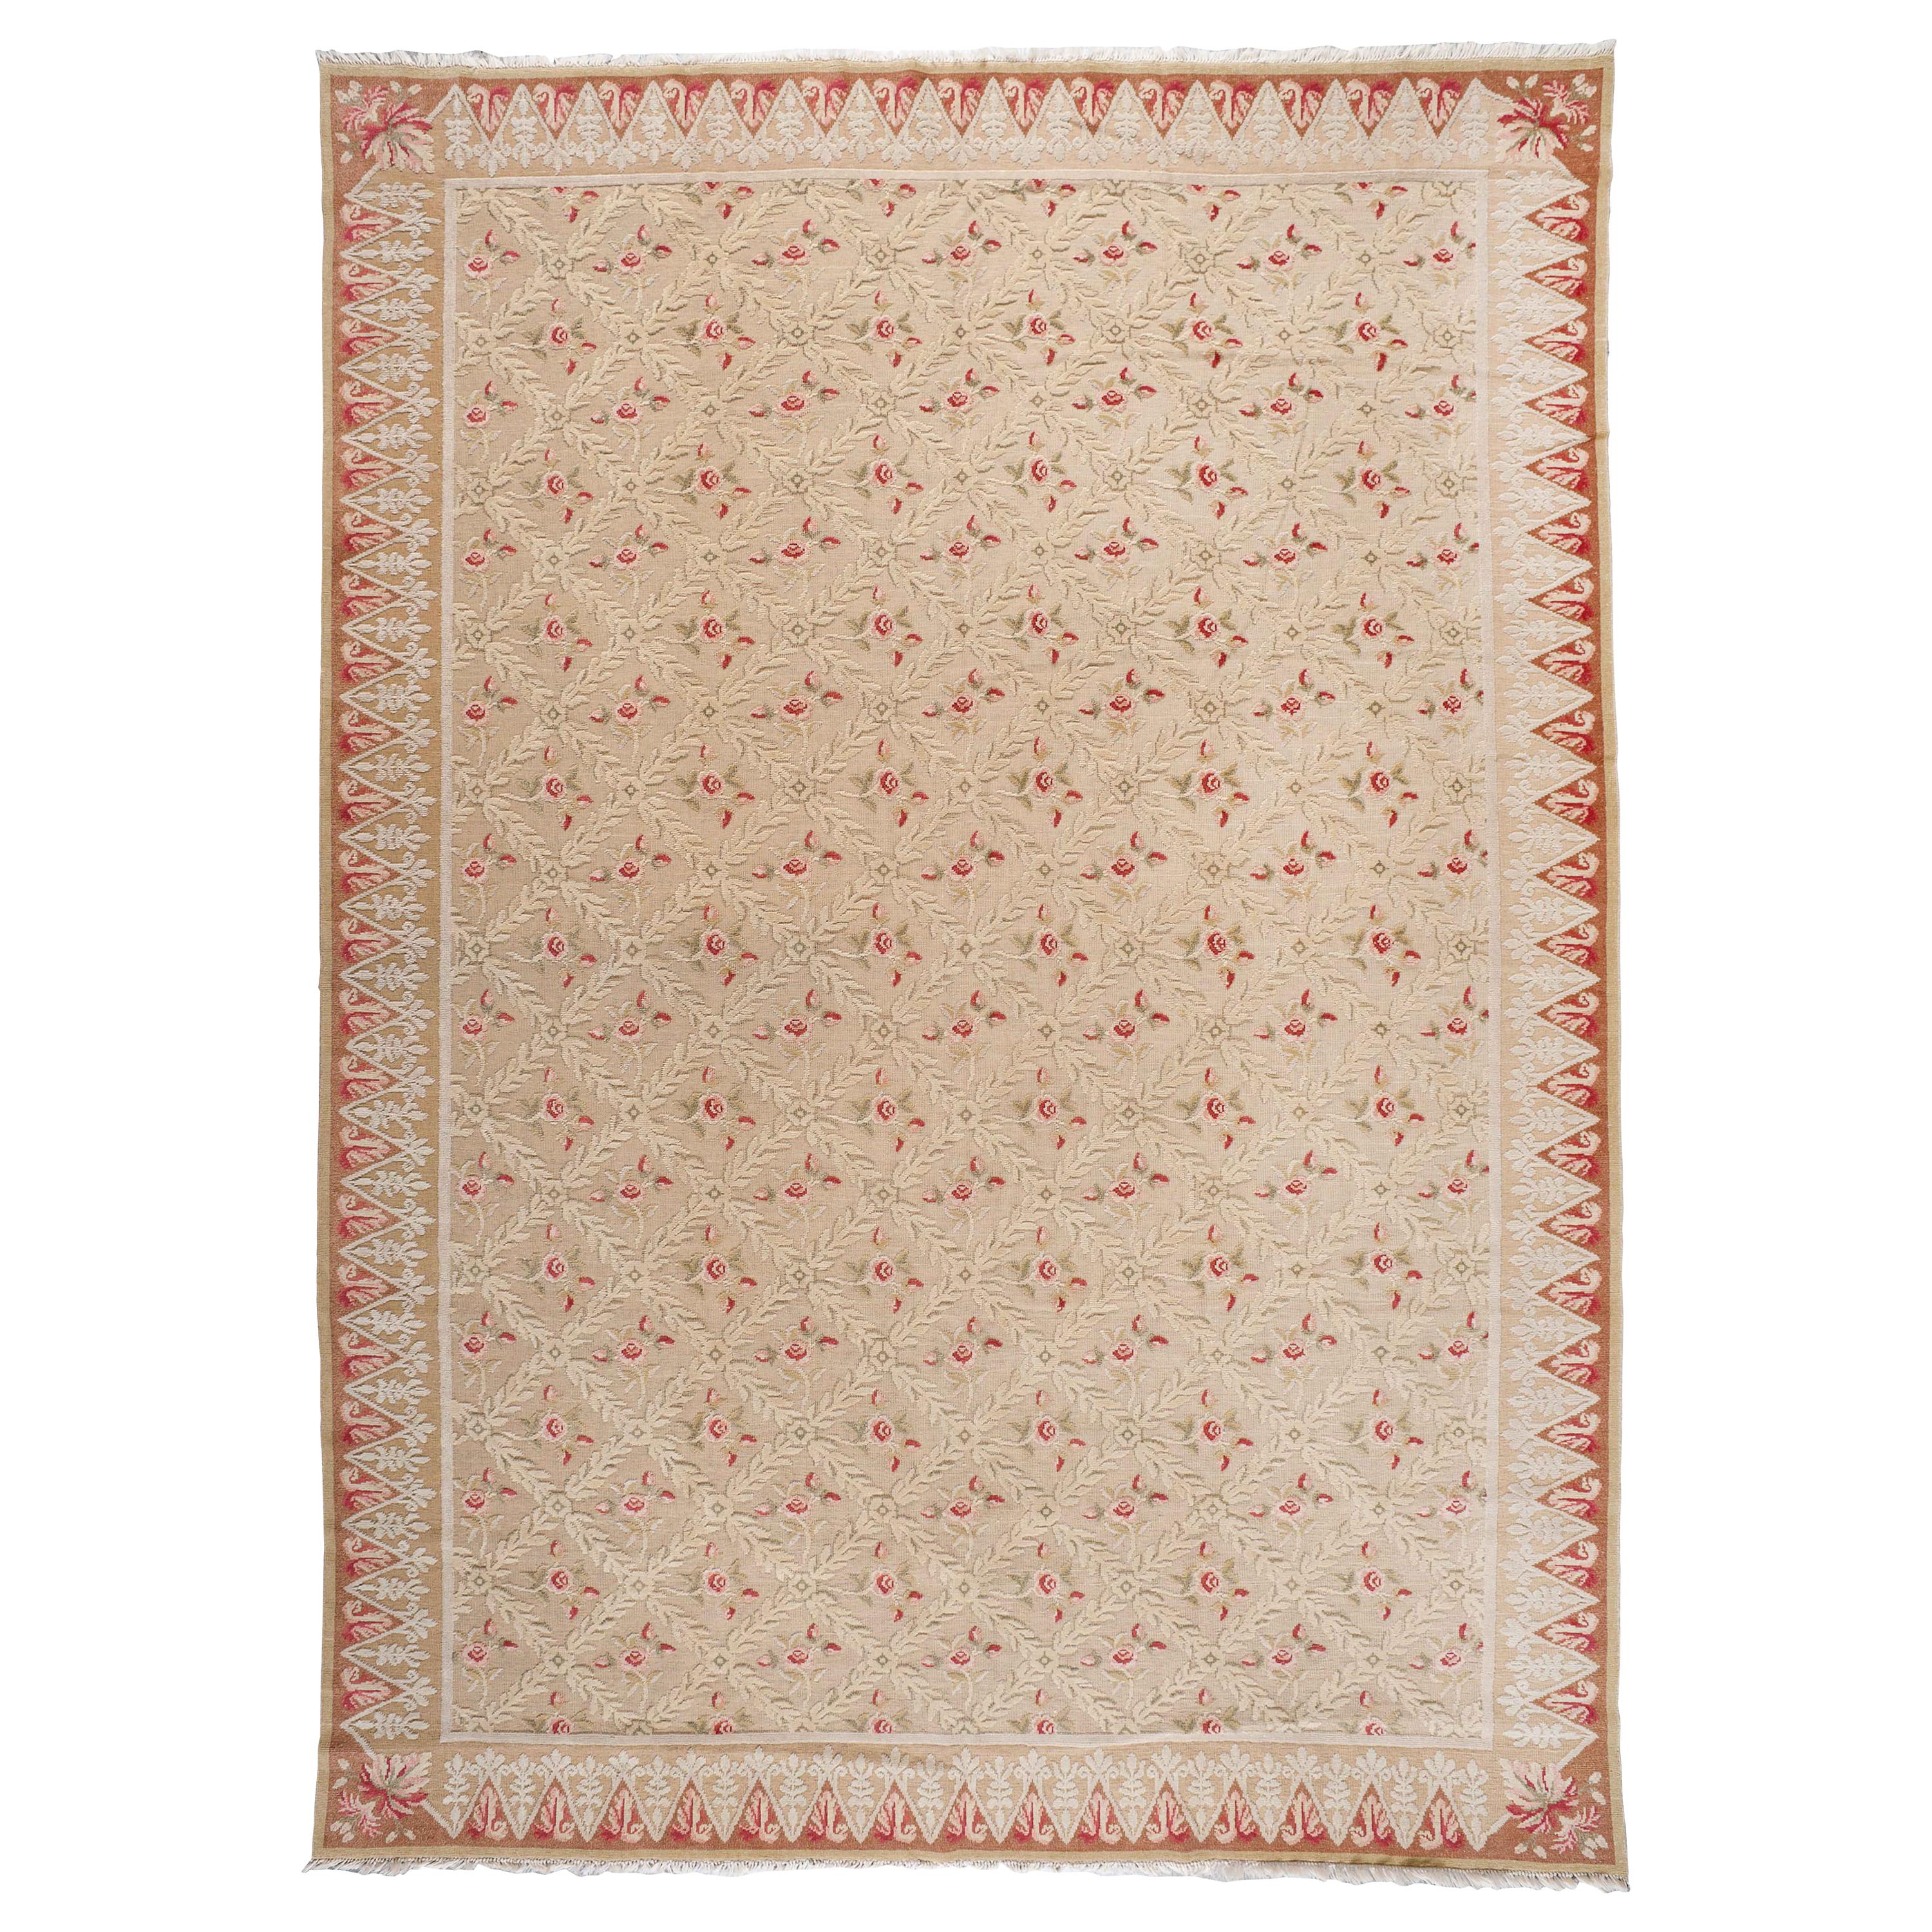 Traditional Axminster Style Rug with Pink Roses